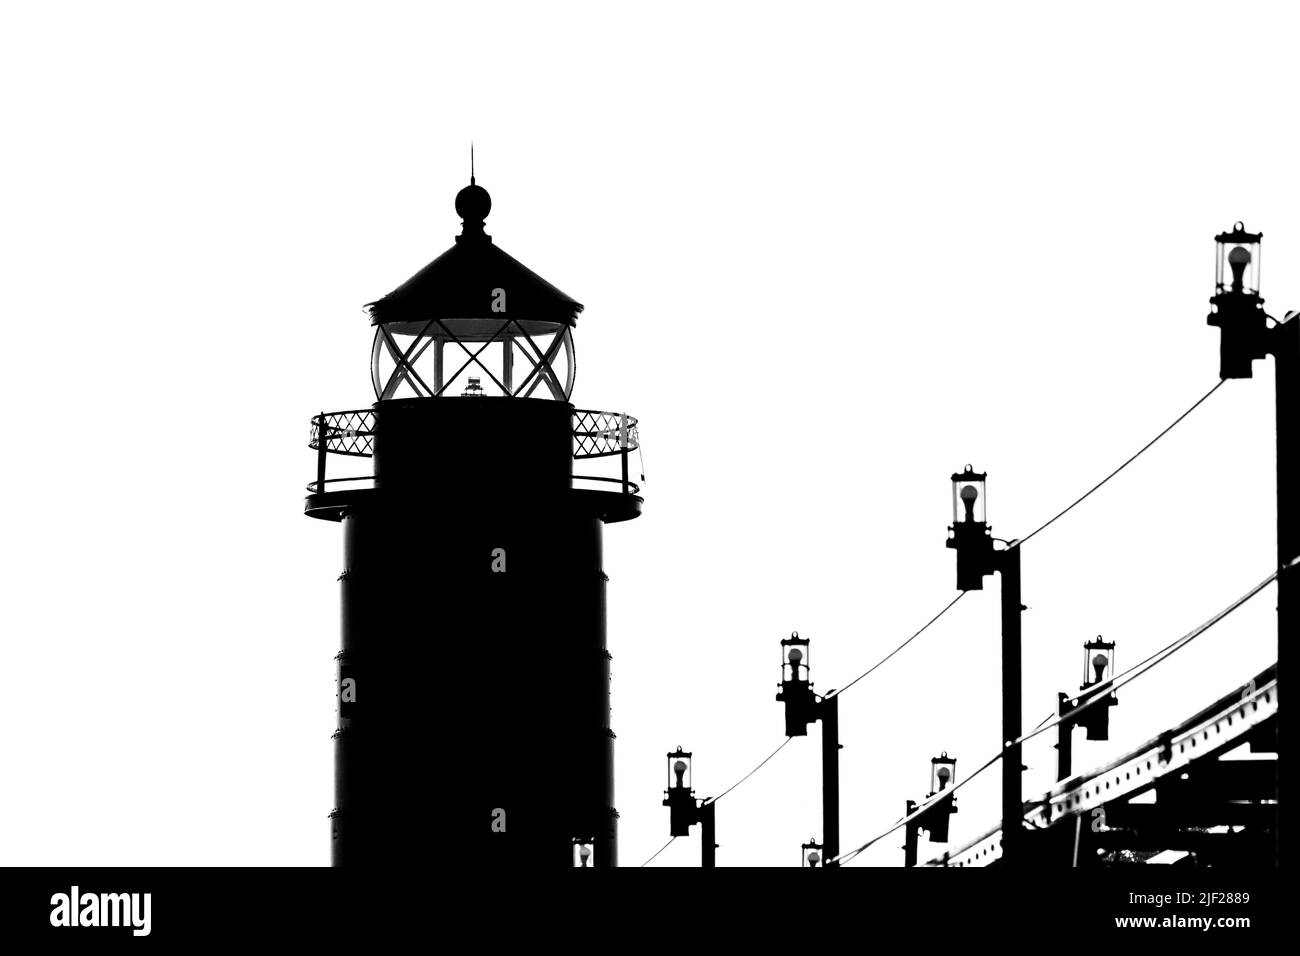 The lighthouse and catwalk in Grand Haven. Michigan, are shown in a black and white silhouette  Stock Photo